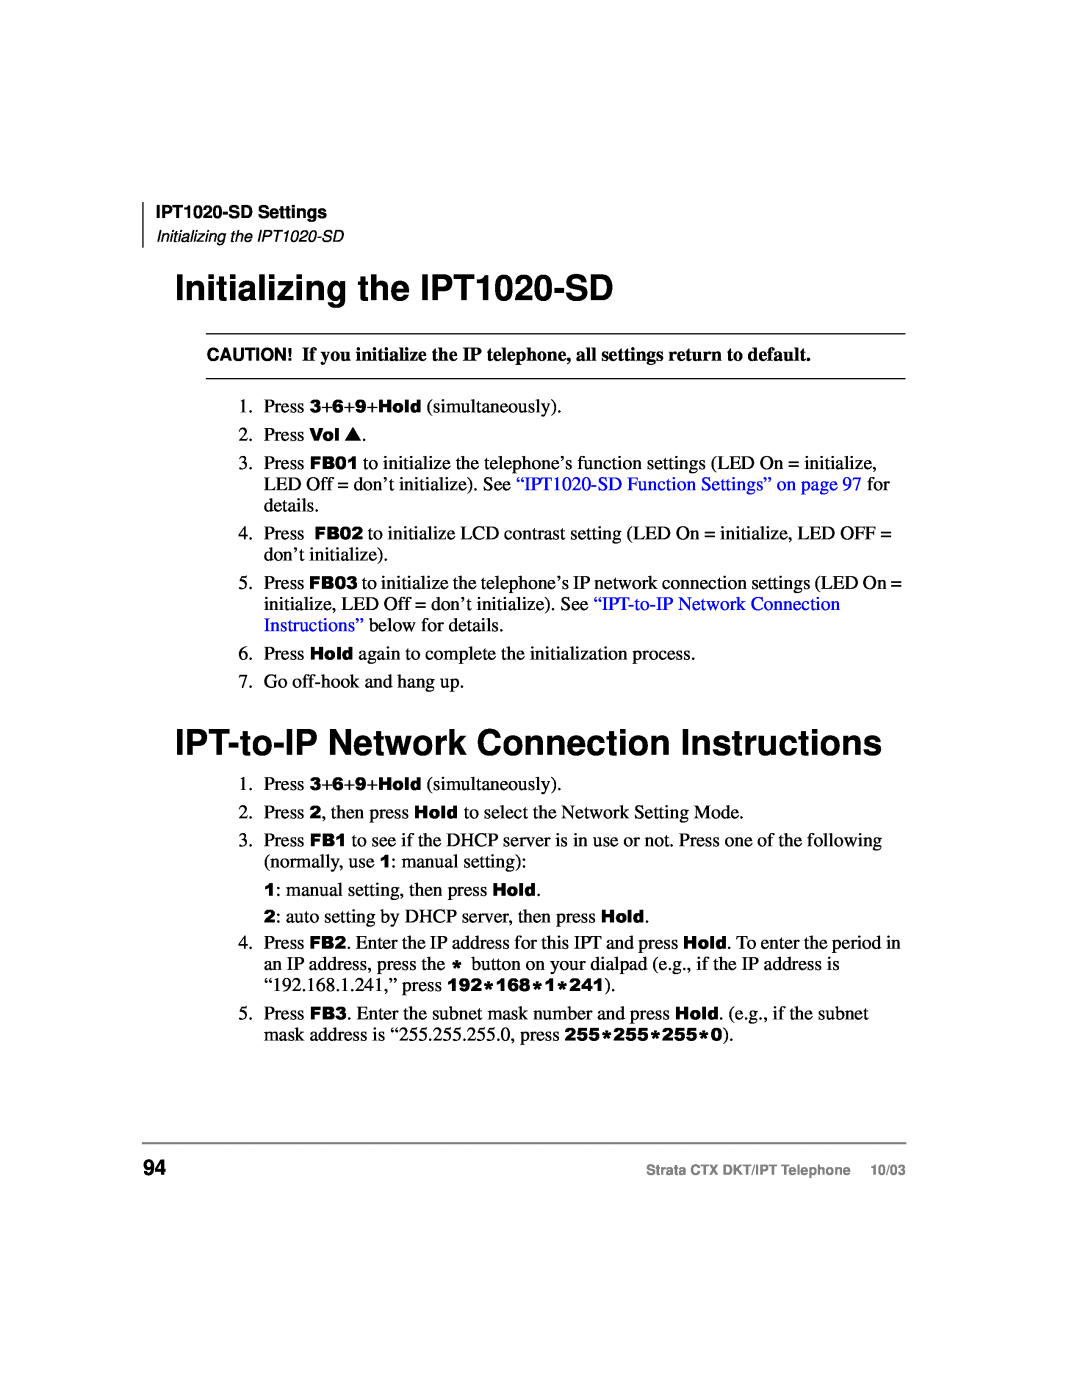 Toshiba DKT manual Initializing the IPT1020-SD, IPT-to-IP Network Connection Instructions 